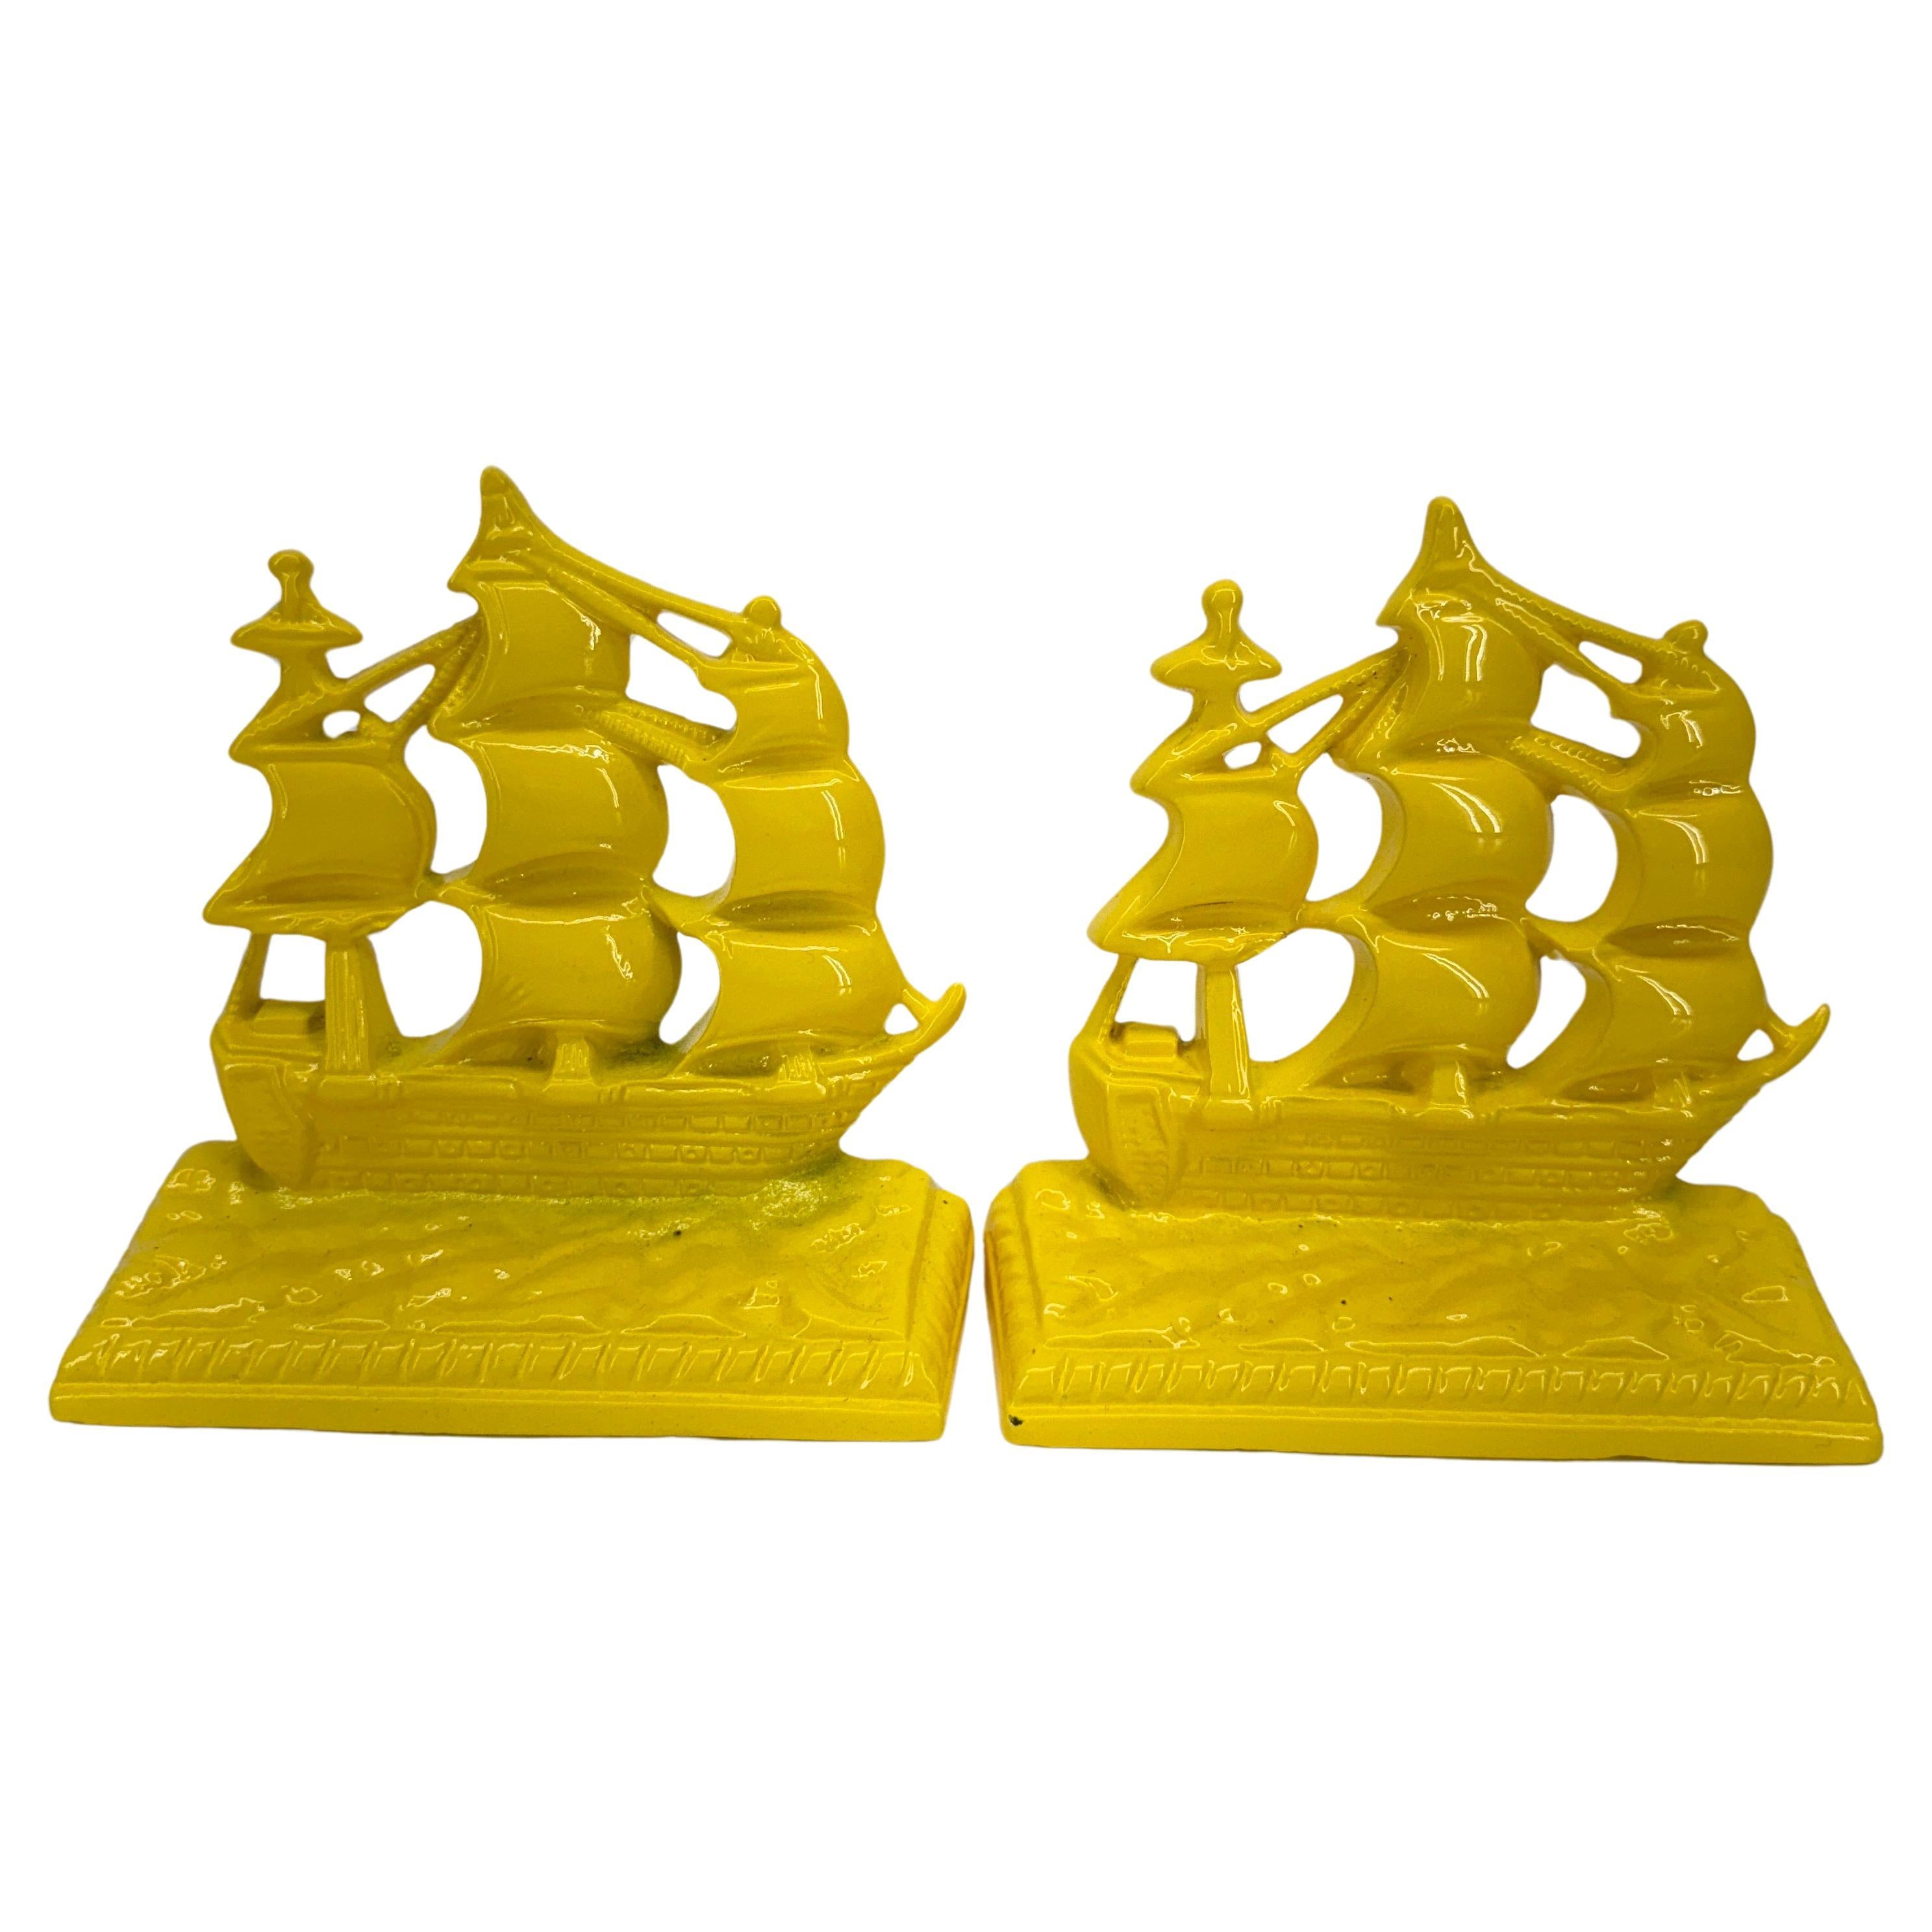 Pair of Mid-Century Modern Sunshine Yellow Boat Bookends In Good Condition For Sale In Haddonfield, NJ